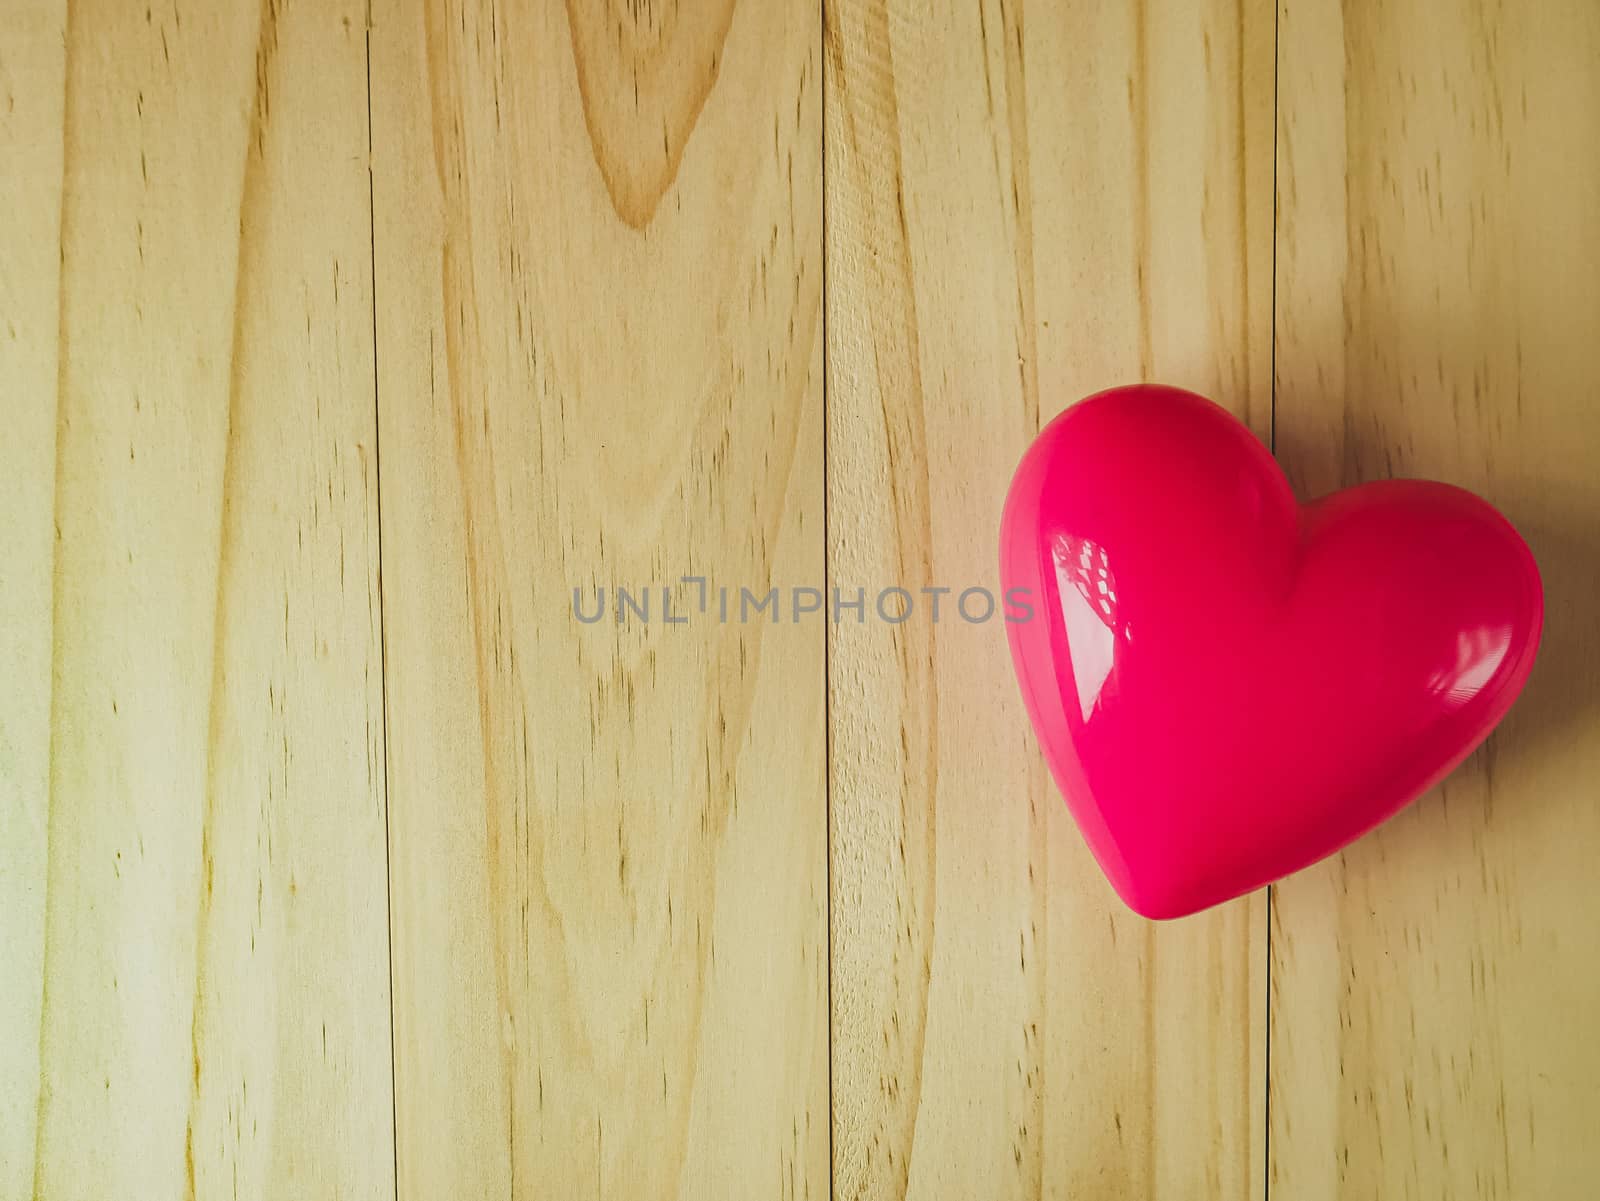 The pink heart on wood table for Health and medical content.
